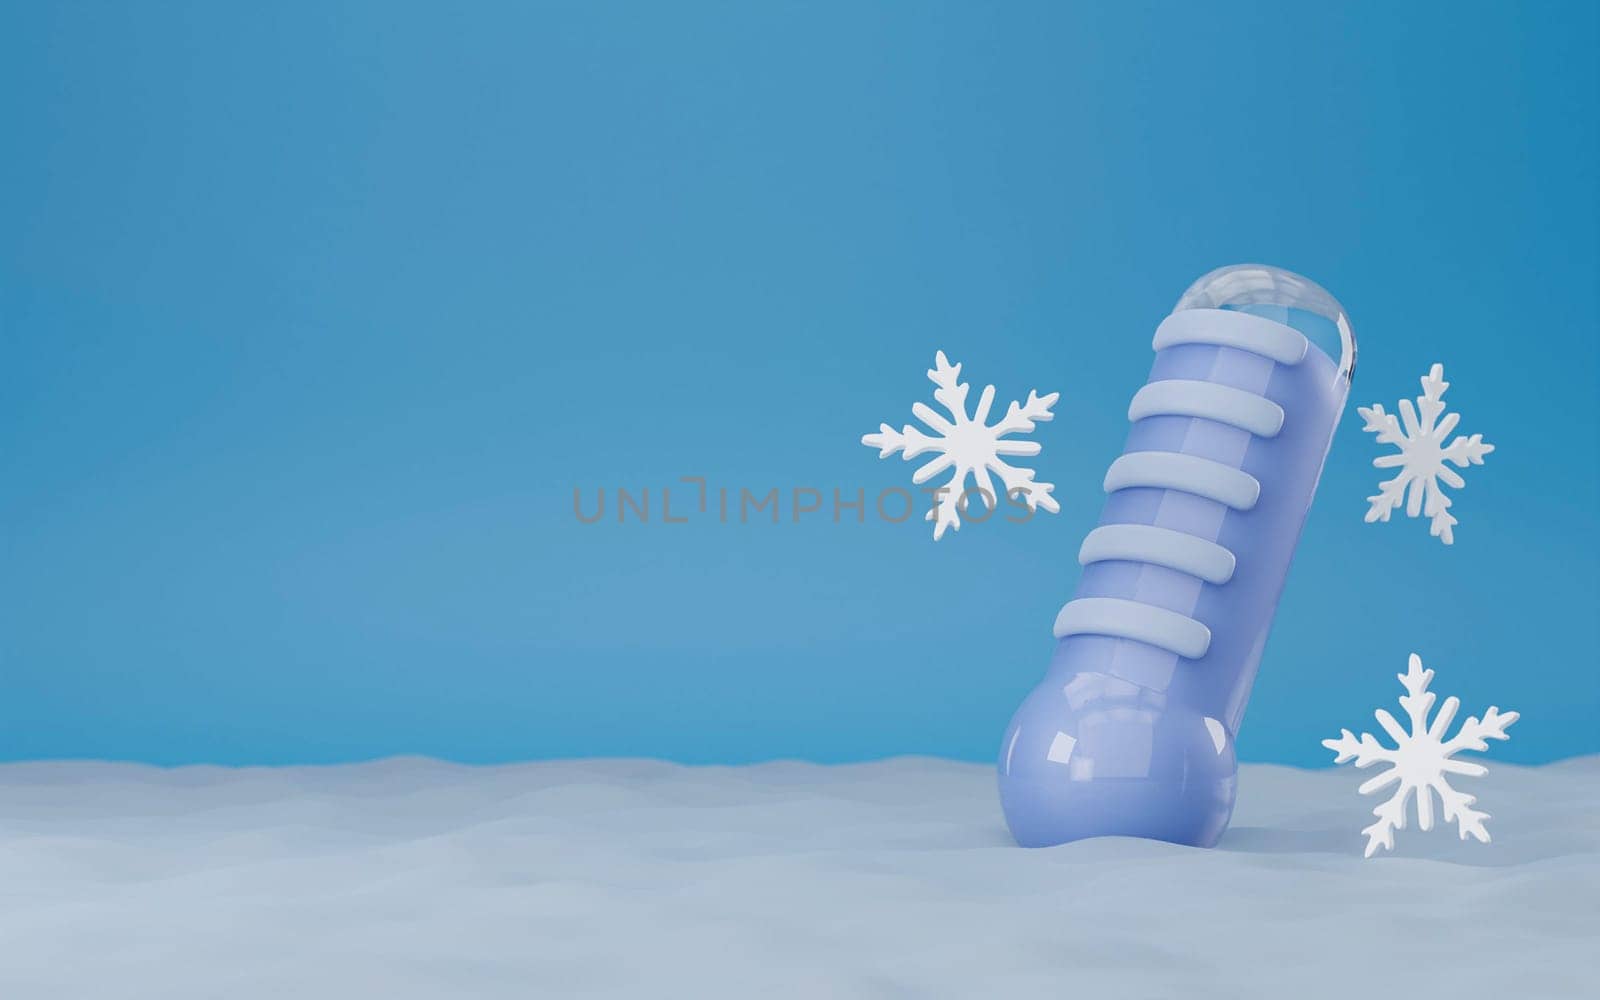 Cold weather thermometer and snowflake isolated on blue background. New Year and winter symbol icon concept. 3D render illustration. by meepiangraphic